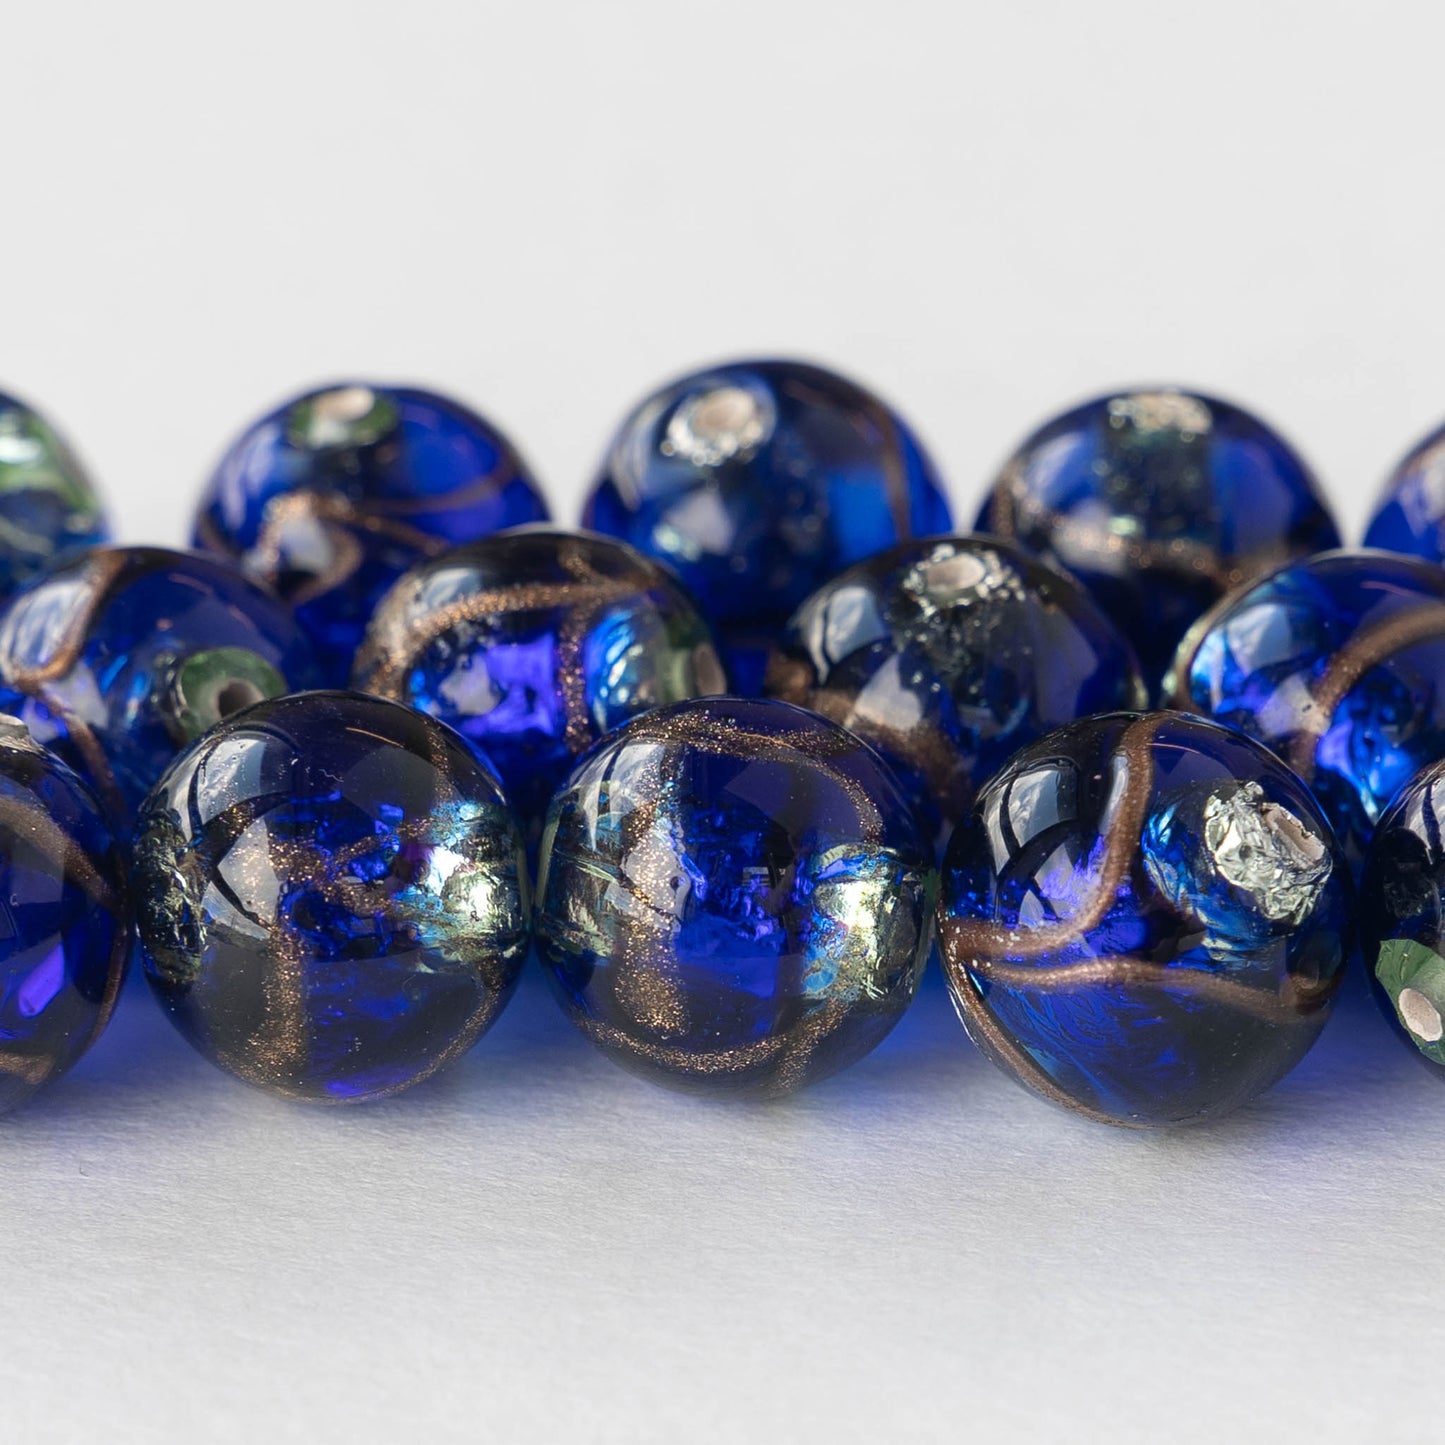 Load image into Gallery viewer, 14mm Handmade Lampwork Foil Beads - Cobalt Blue - 2, 4 or 8
